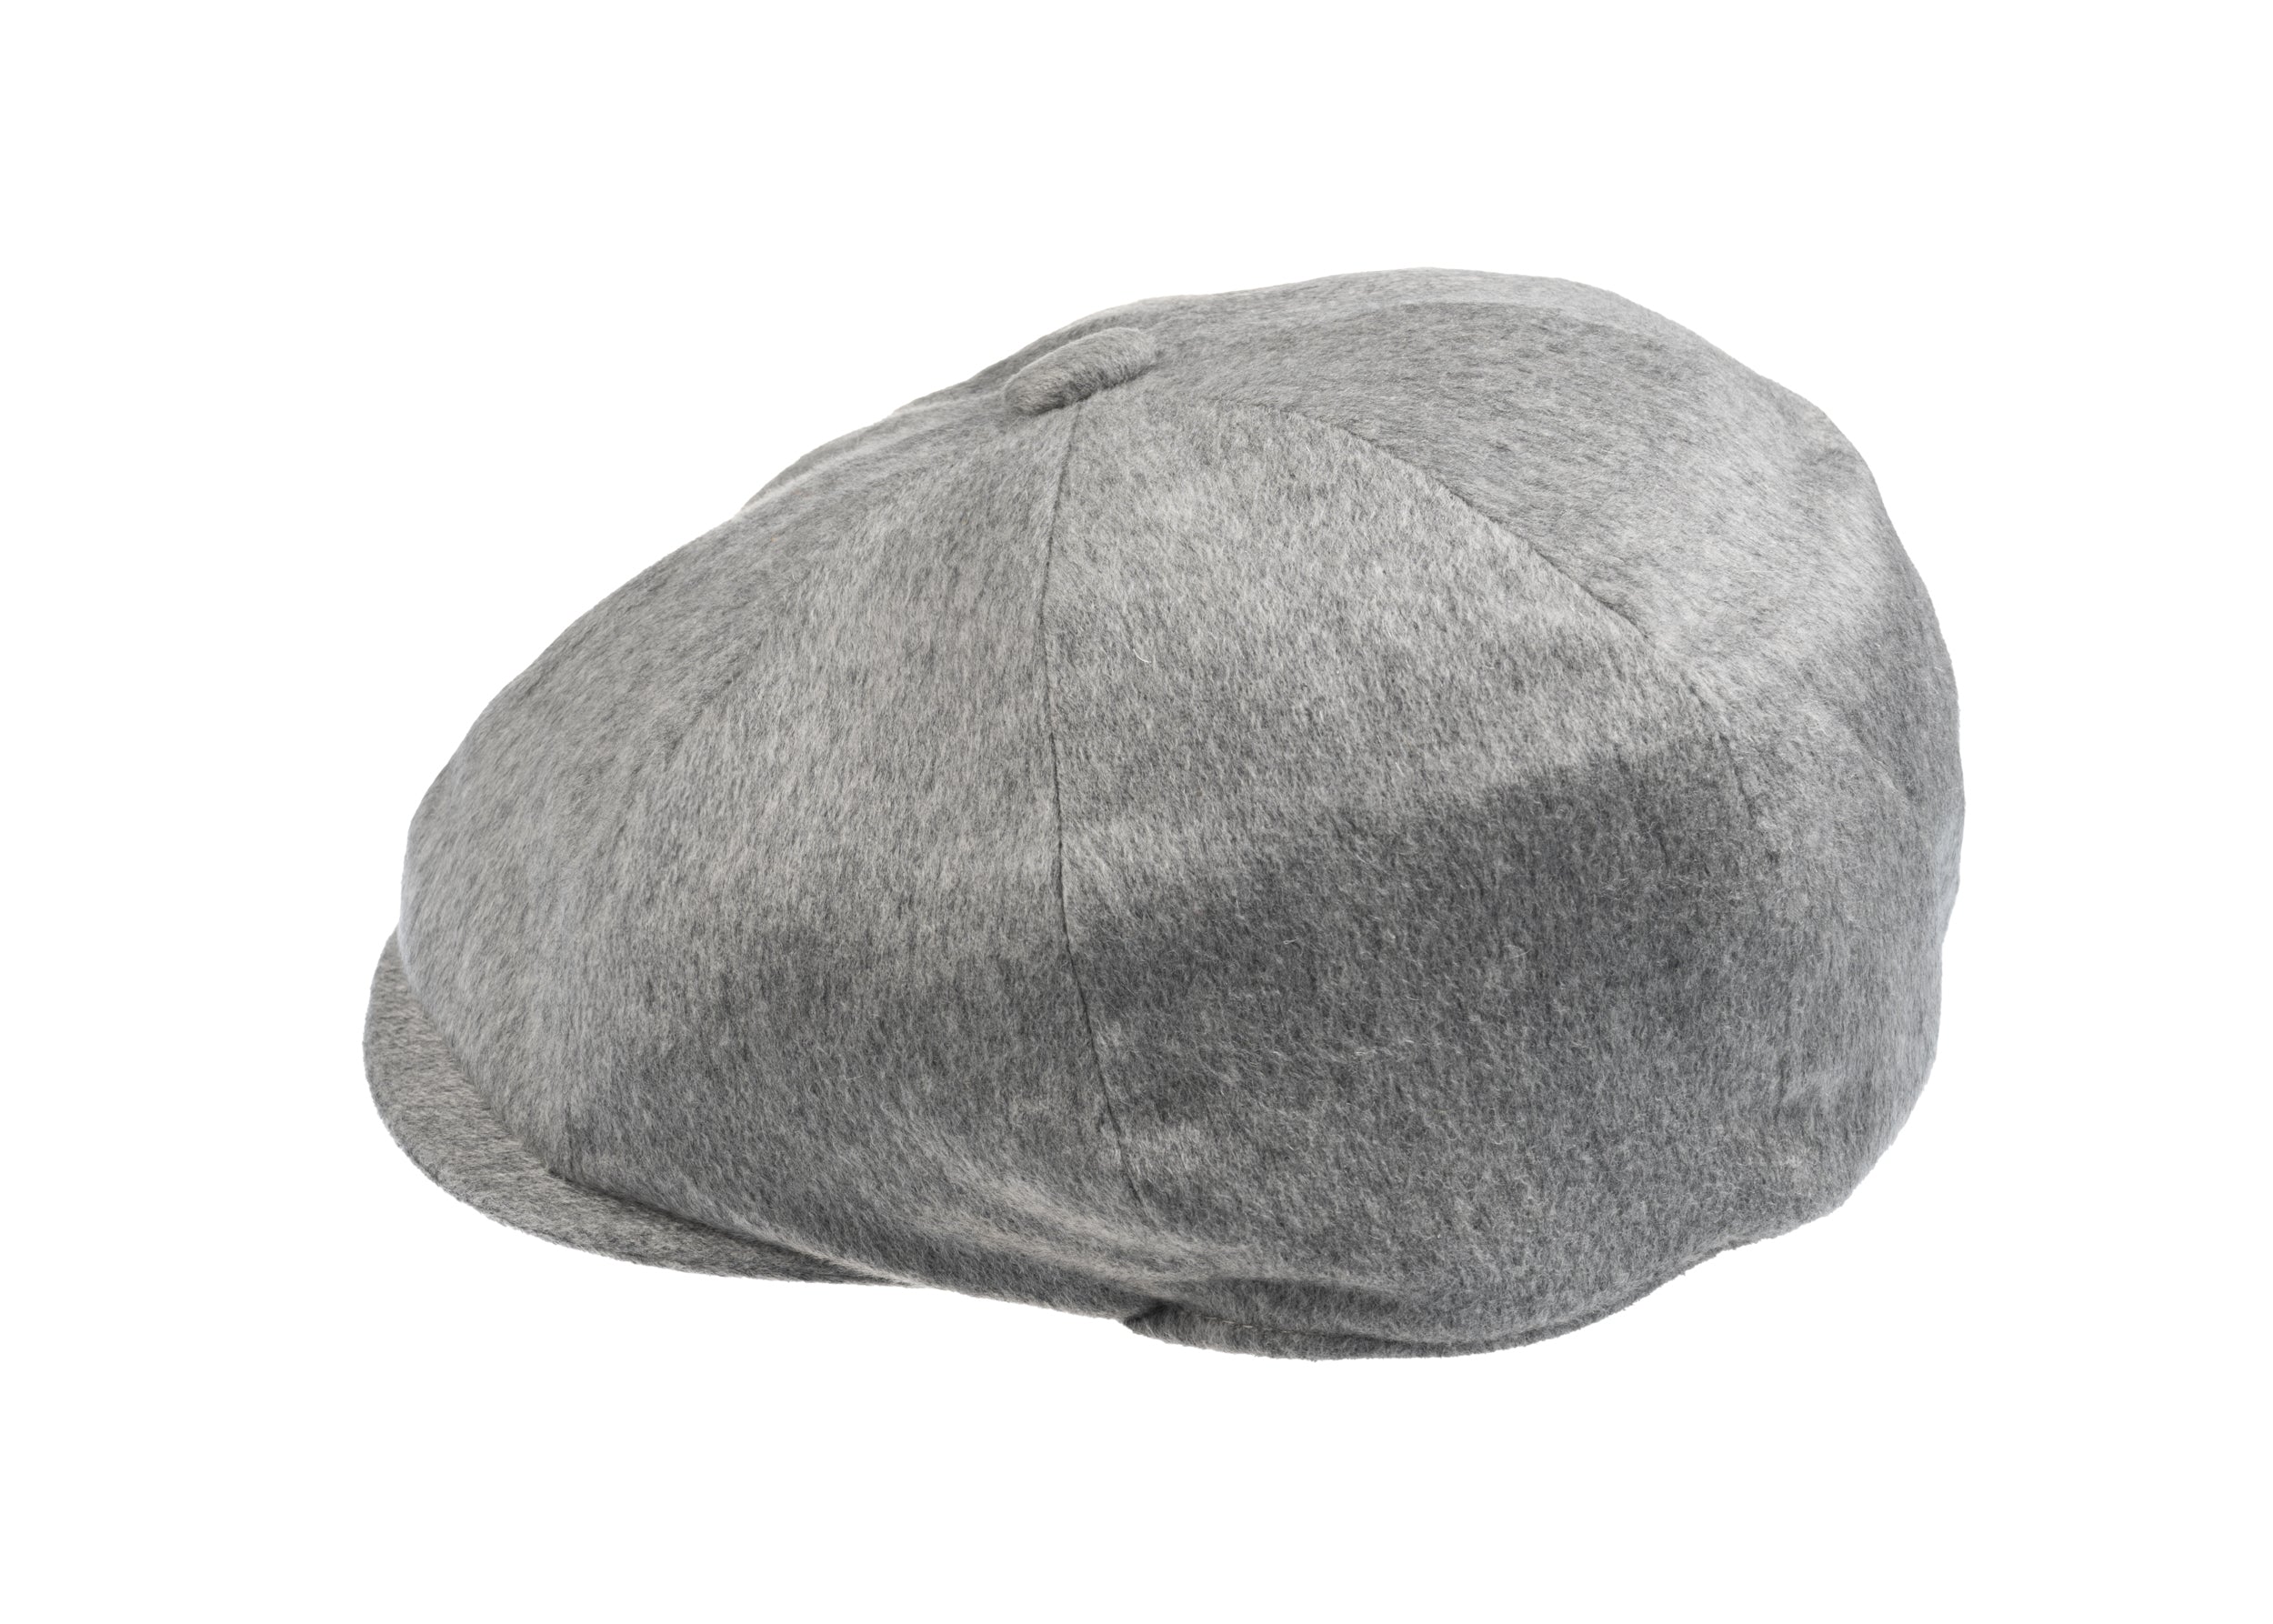 Christys' x Johnstons of Elgin Cashmere Made in England 8 piece Cap in Light Grey